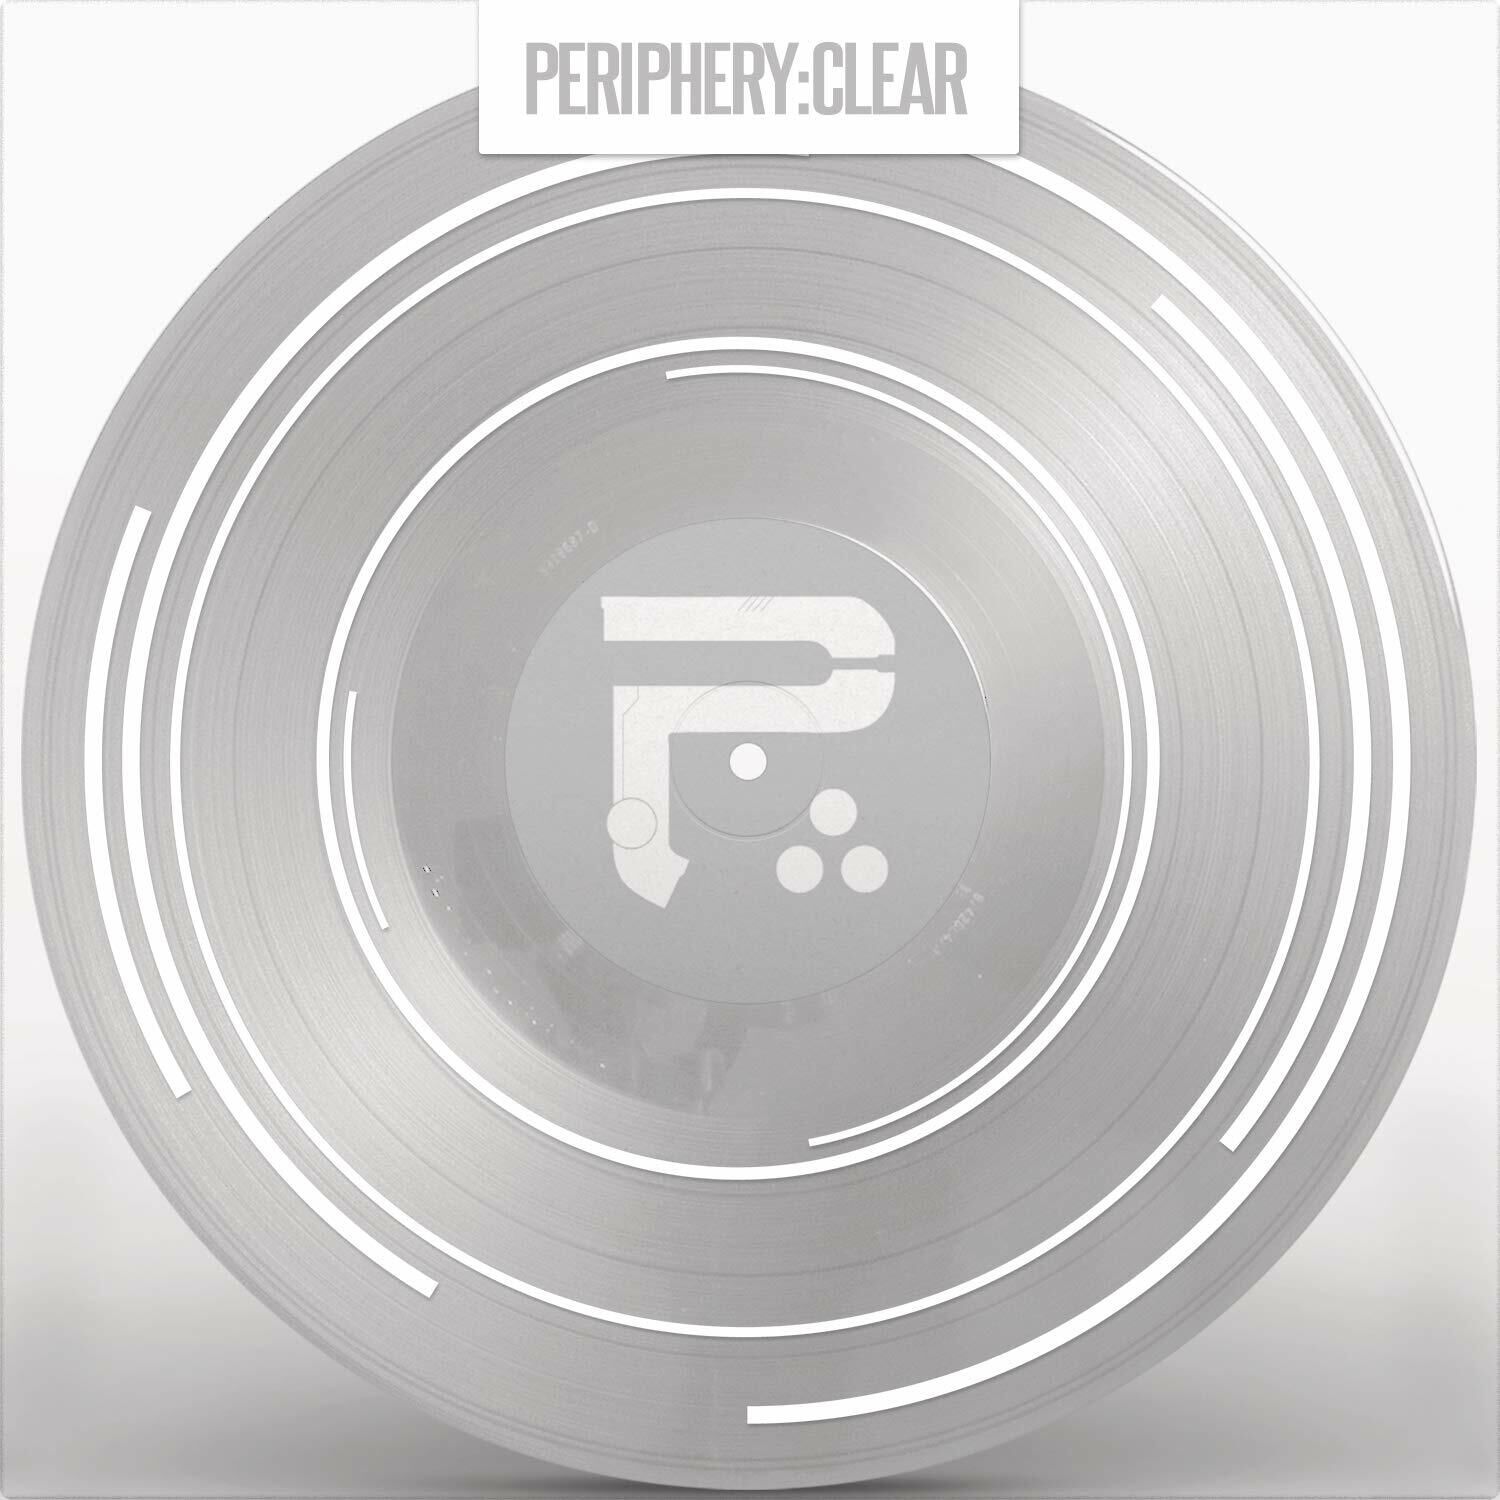 PERIPHERY - Clear EP [CLEAR LP]